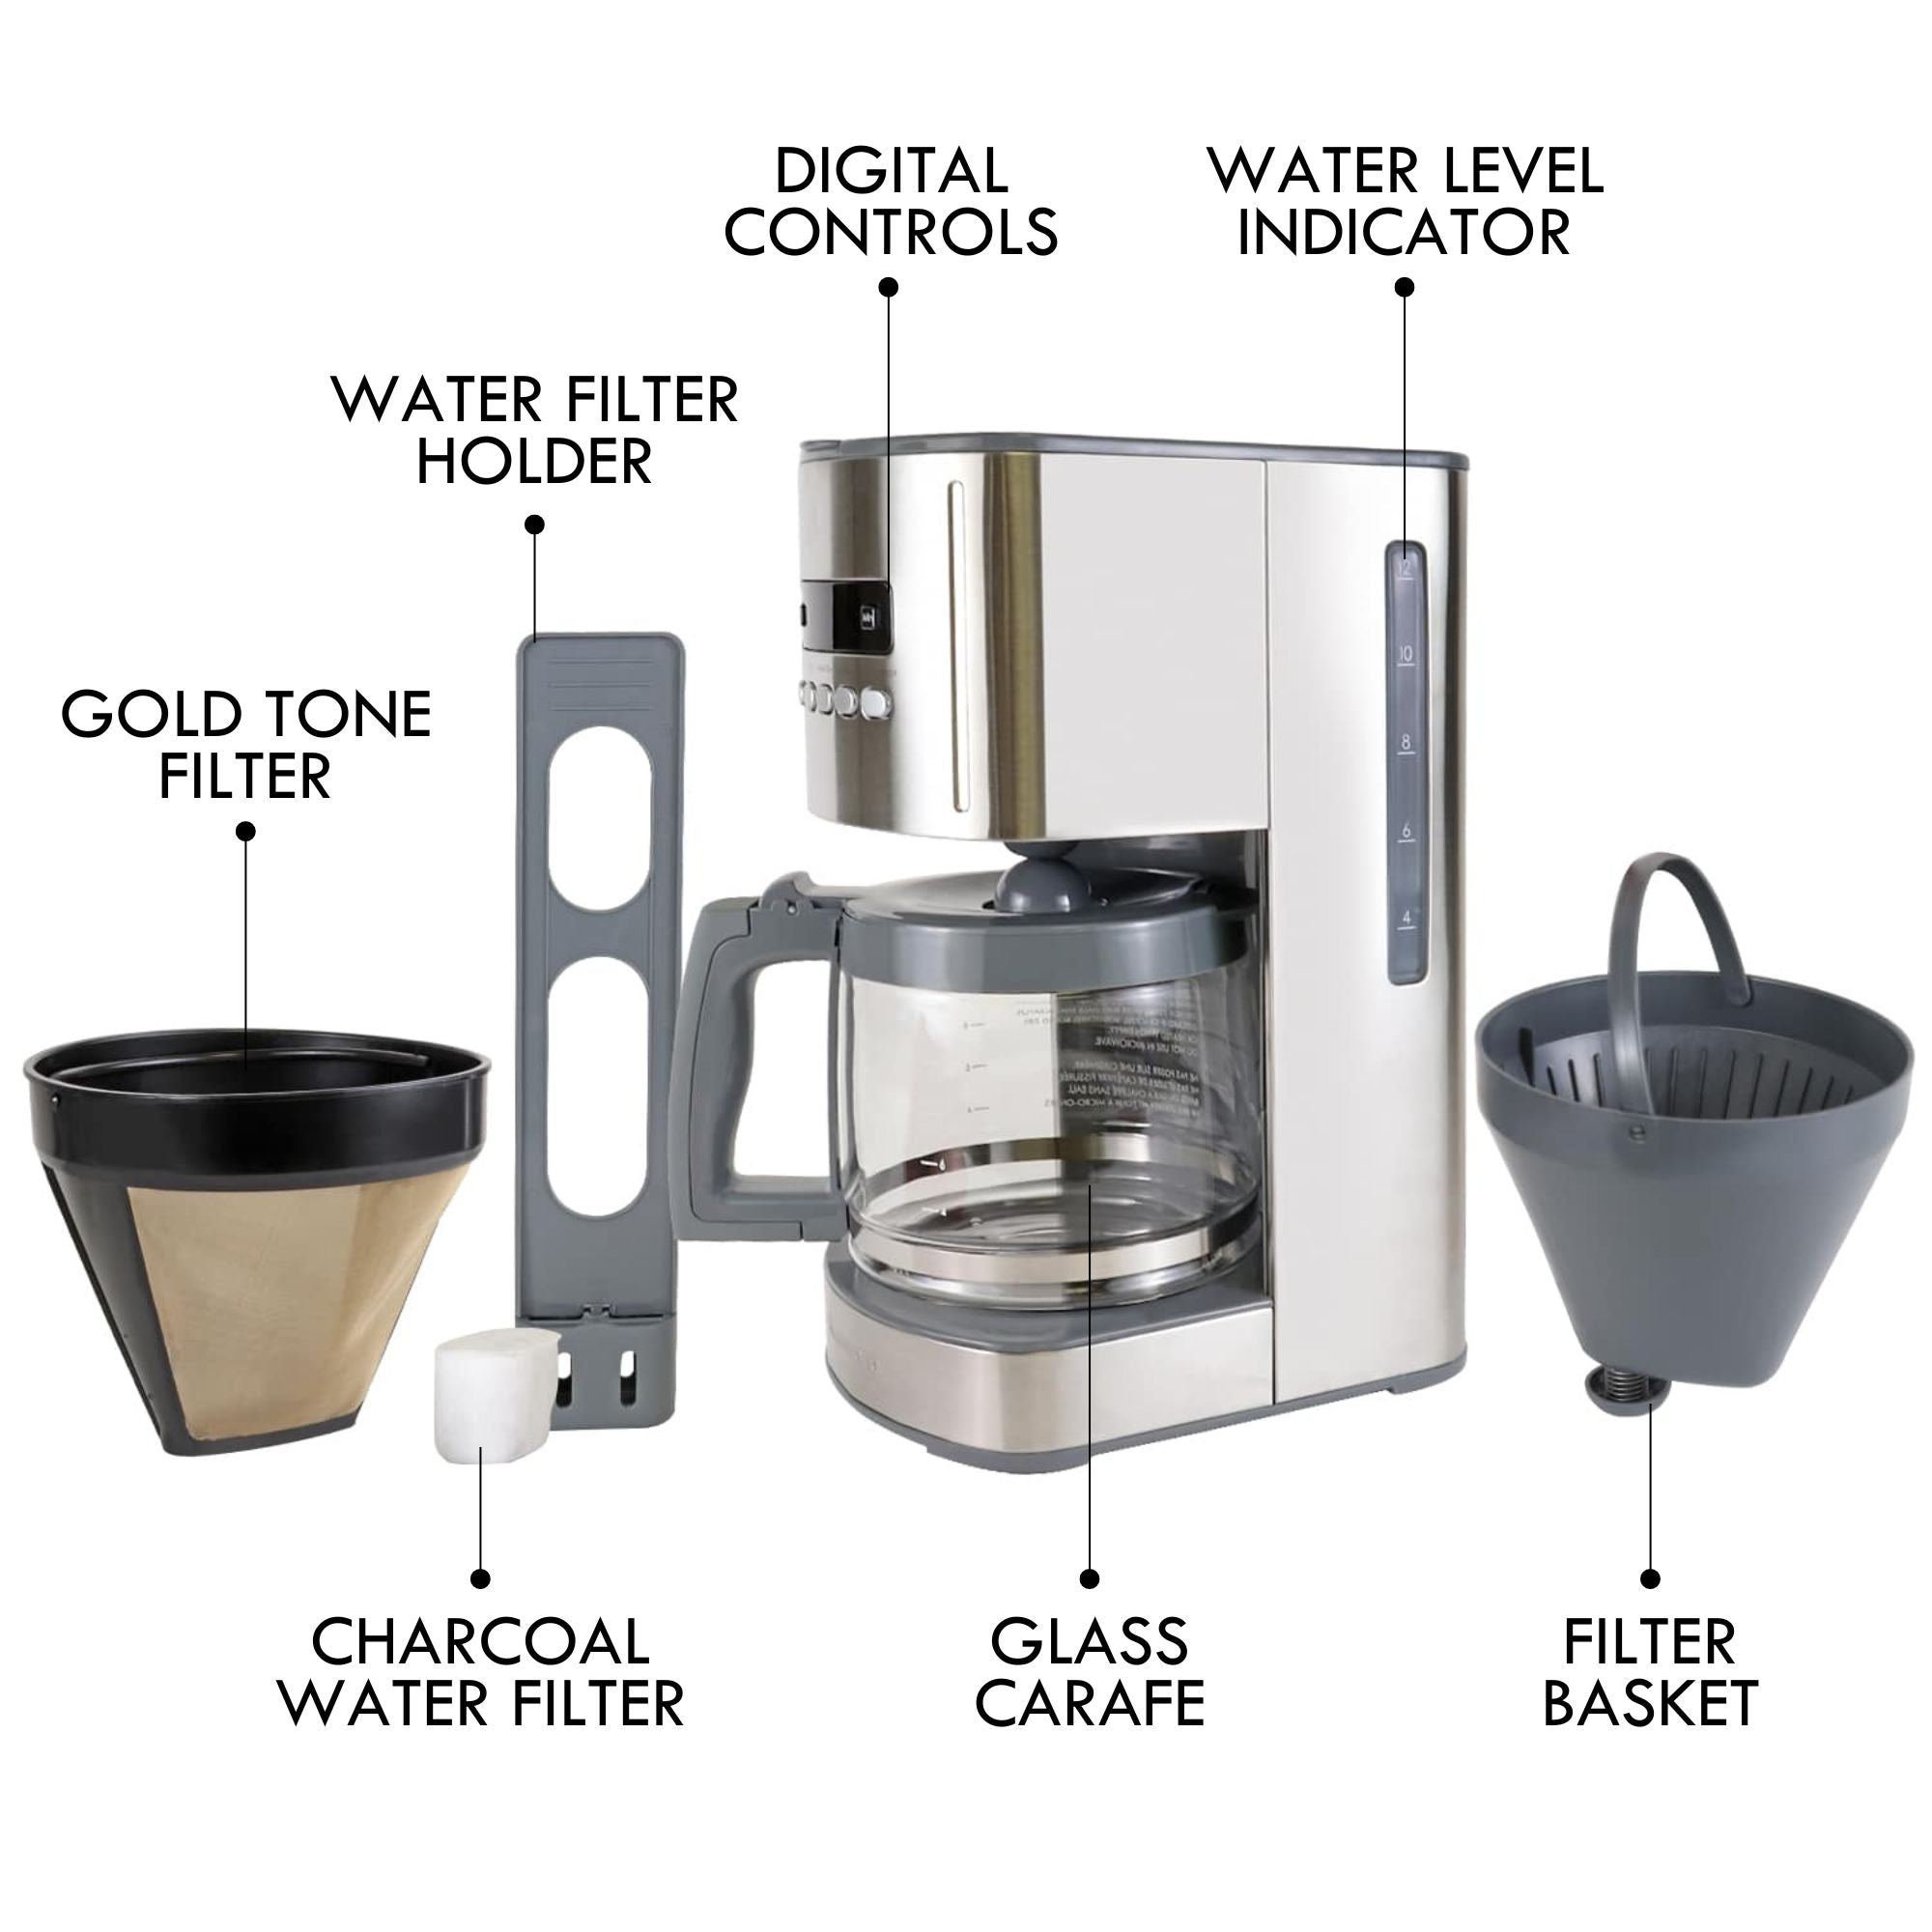 Kenmore 12 cup programmable coffeemaker on a white background with parts and accessories labeled: Water filter holder; digital controls; water level indicator; gold tone filter; charcoal water filter; glass carafe; filter basket